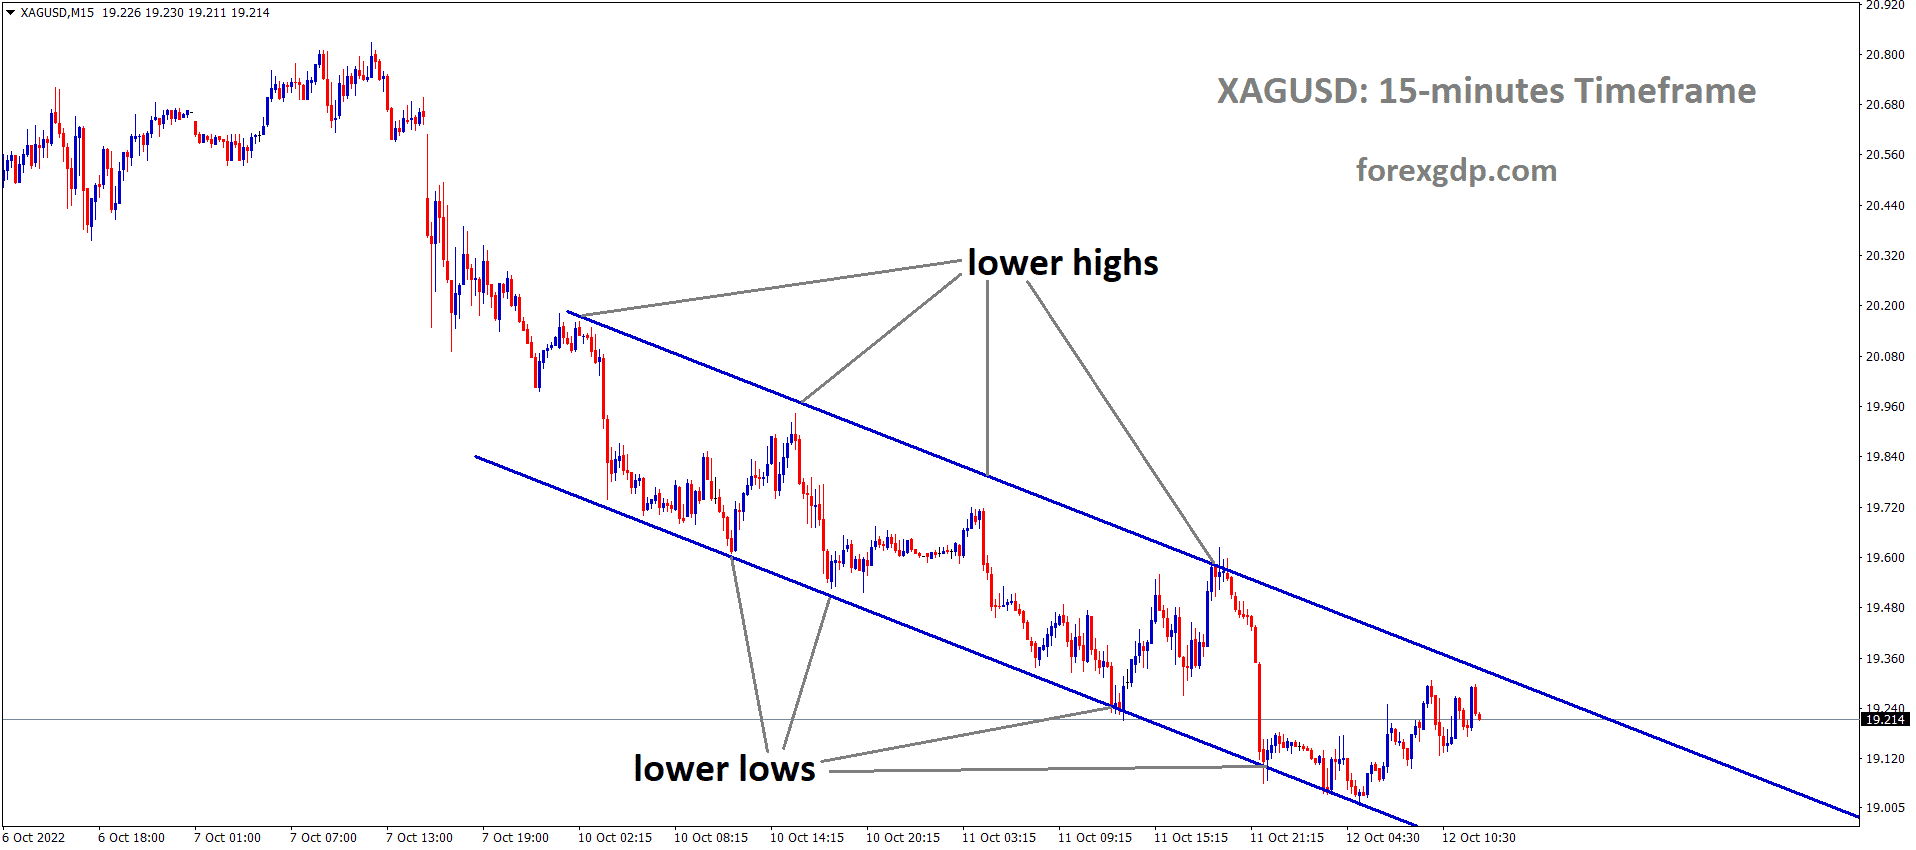 XAGUSD Silver Price is moving in the Descending channel and the market has reached the lower high area of the channel